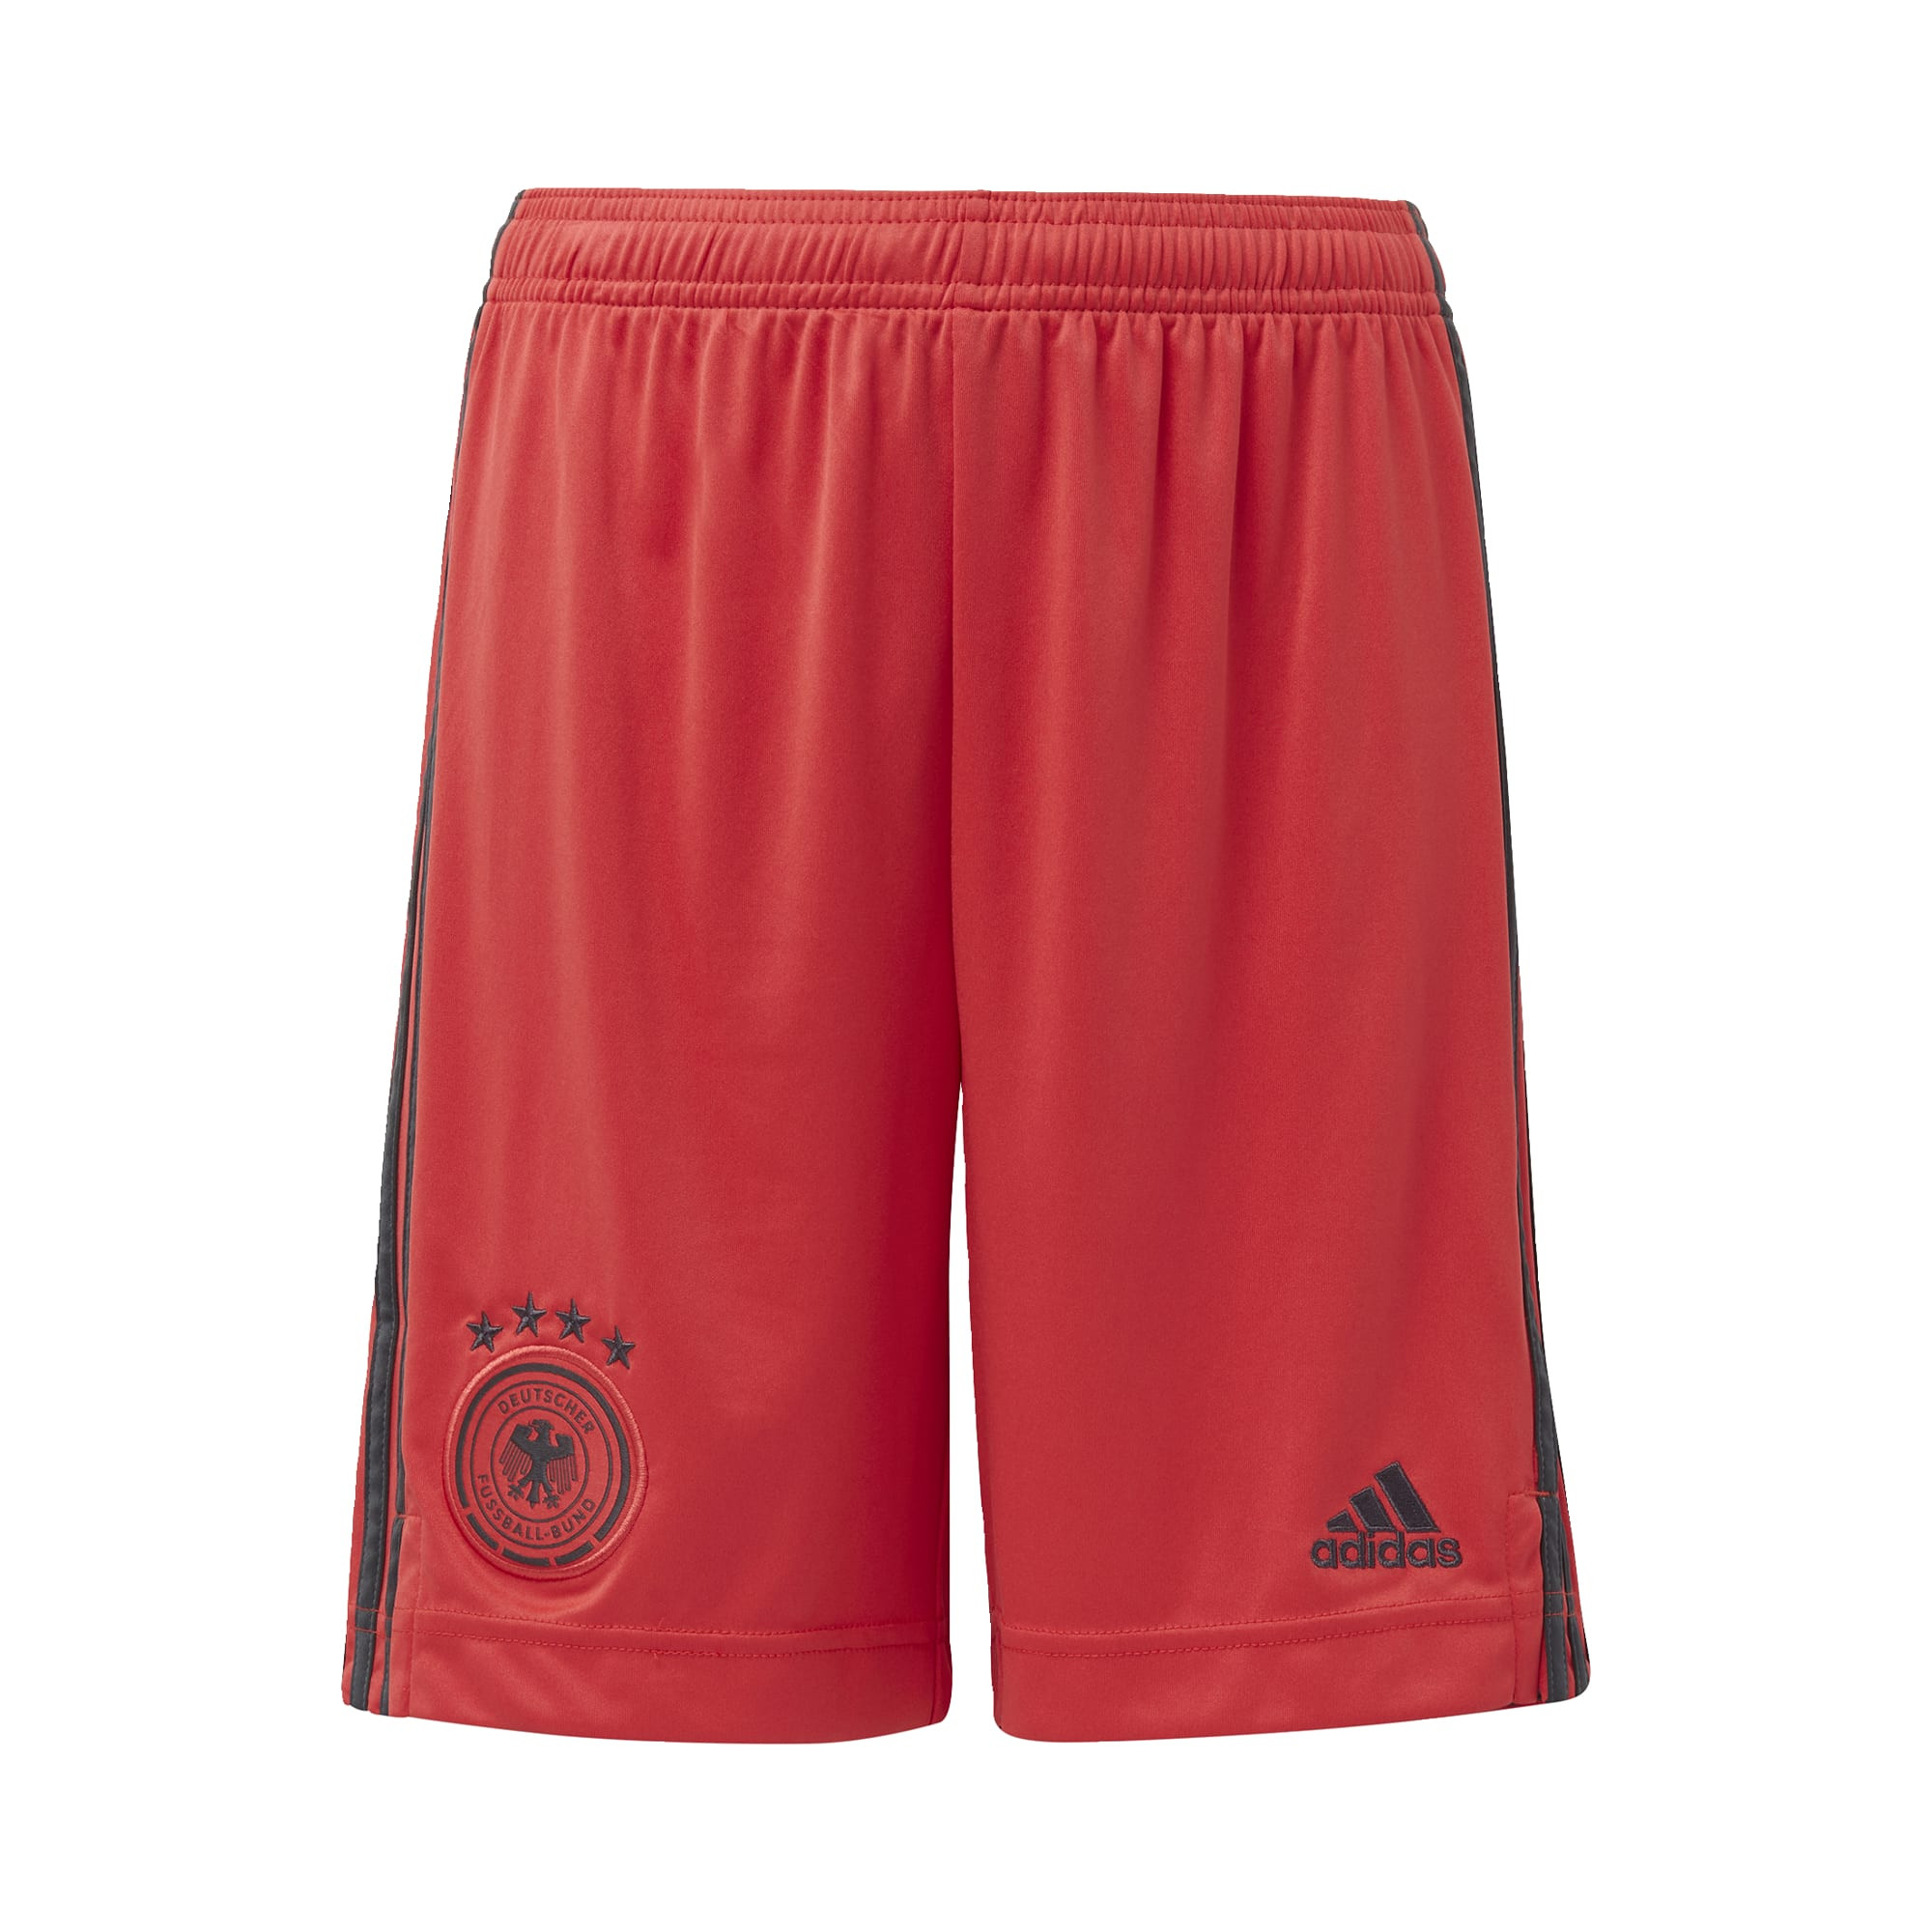 adidas Duitsland Thuis Keepersshort 2020-2021 Kids Rood